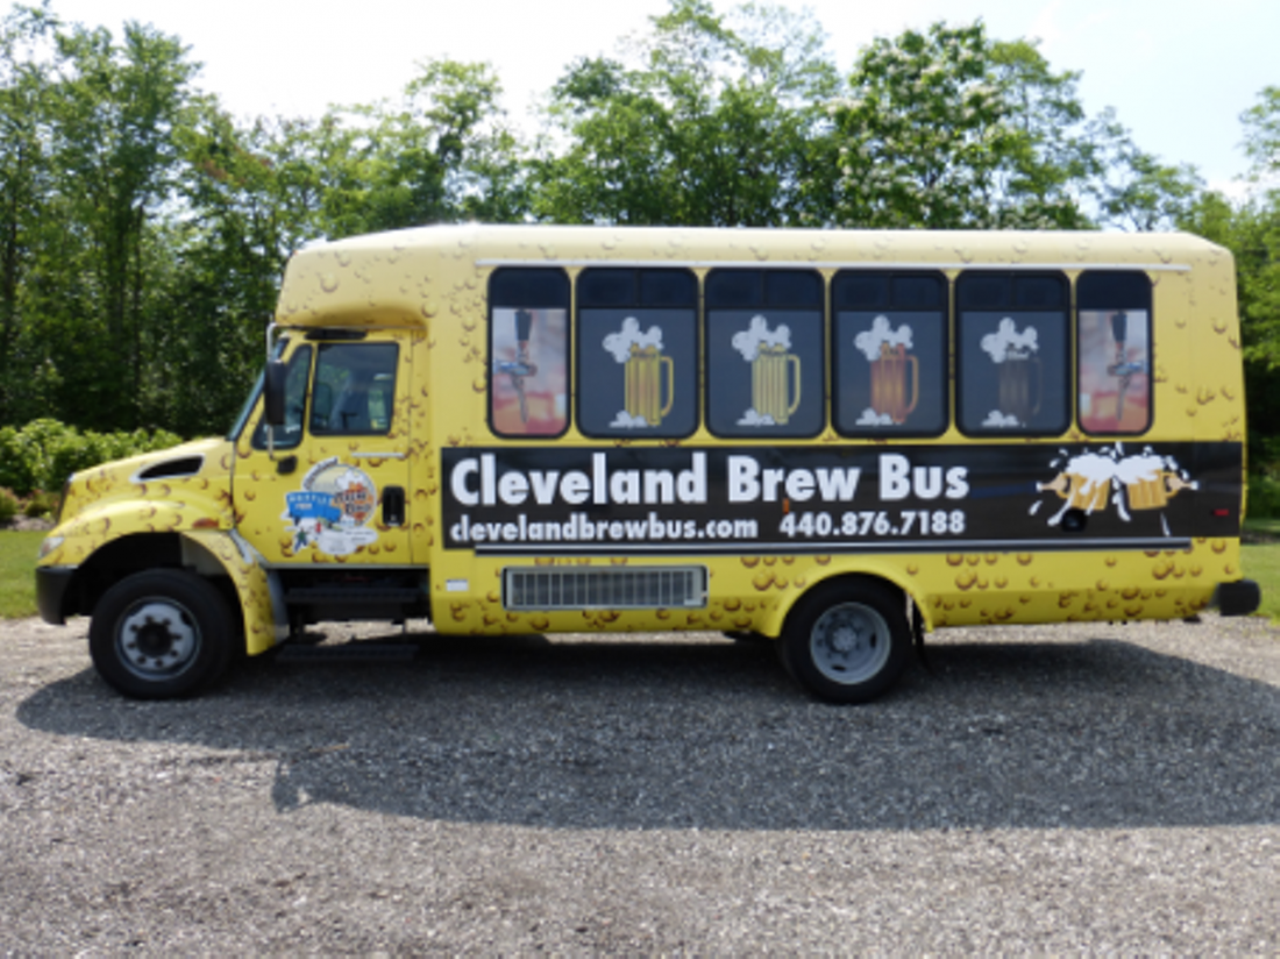 Cleveland Brew Bus - $60
Cleveland Brew Bus tours are proof that God loves us and wants us to be happy. By the time we managed to hit up all those breweries in Ohio City, downtown or on the west side, we&#146;d be too plowed to steer. Instead, we hop aboard the cozy coach, which magically transports us from pint to pint. Banish any notions of this being a party bus though, because beer education is the real name of the game. Between brewery tastings, owners and guides Leslie Basalla-McCafferty and Brian McCafferty regale riders with beer history, facts and entertainment, fueling beer appreciation all along the way. Strong ties with all the local breweries ensure VIP treatment at each and every stop, where brewers and hosts offer deep dives into their product line. clevelandbrewbus.com 216-773-2567